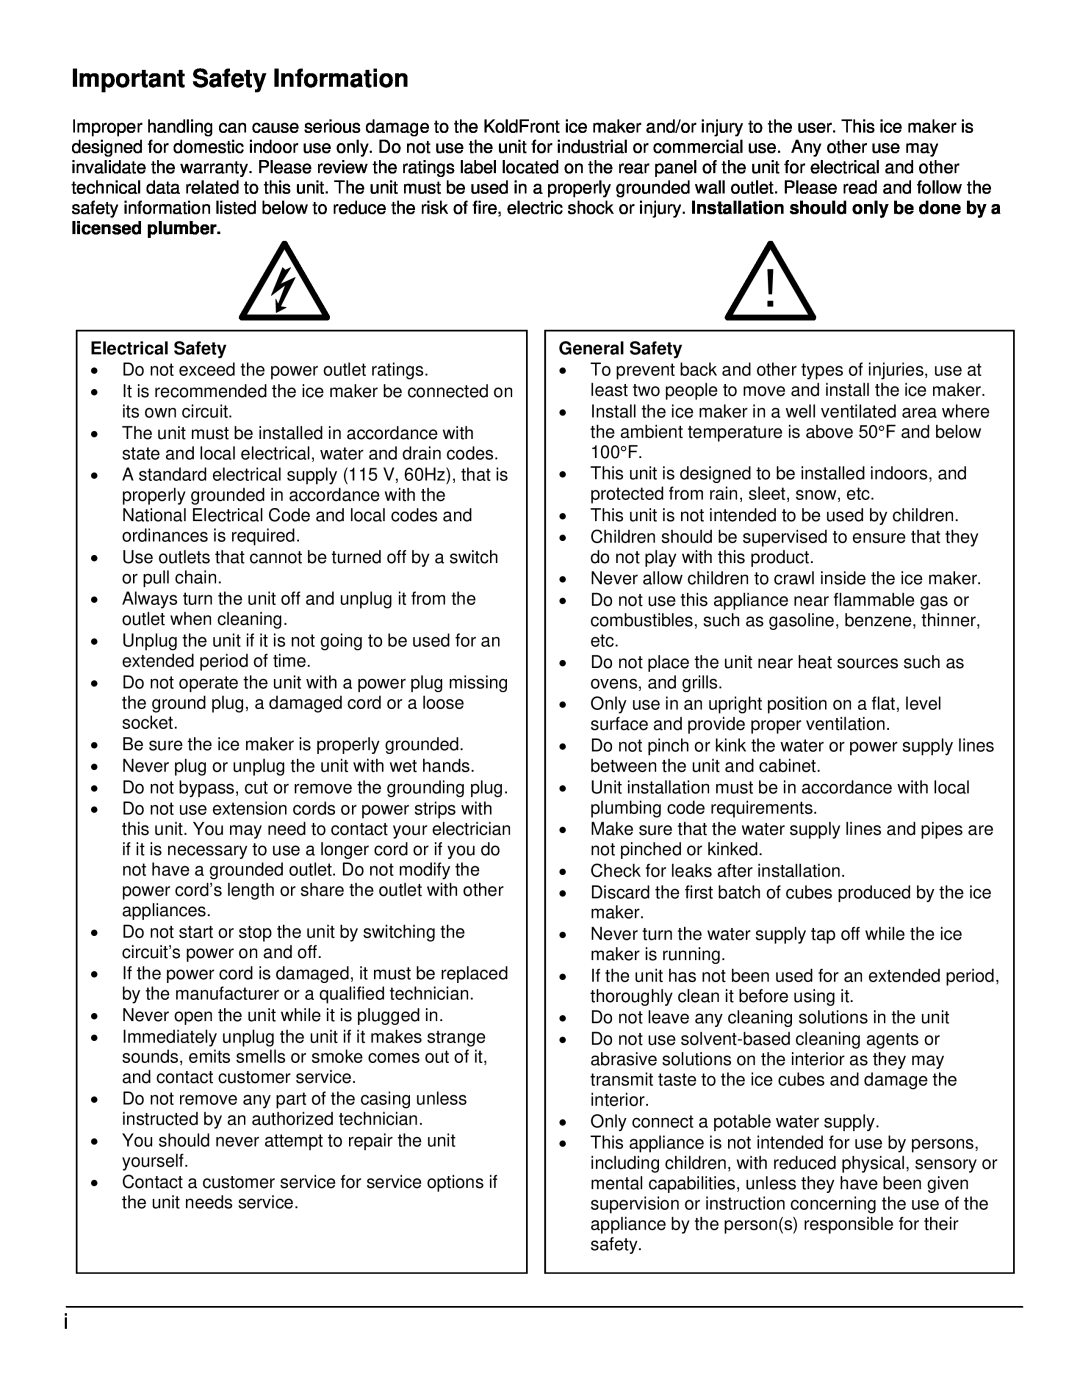 KoldFront KIM450S owner manual Important Safety Information, licensed plumber, Electrical Safety, General Safety 